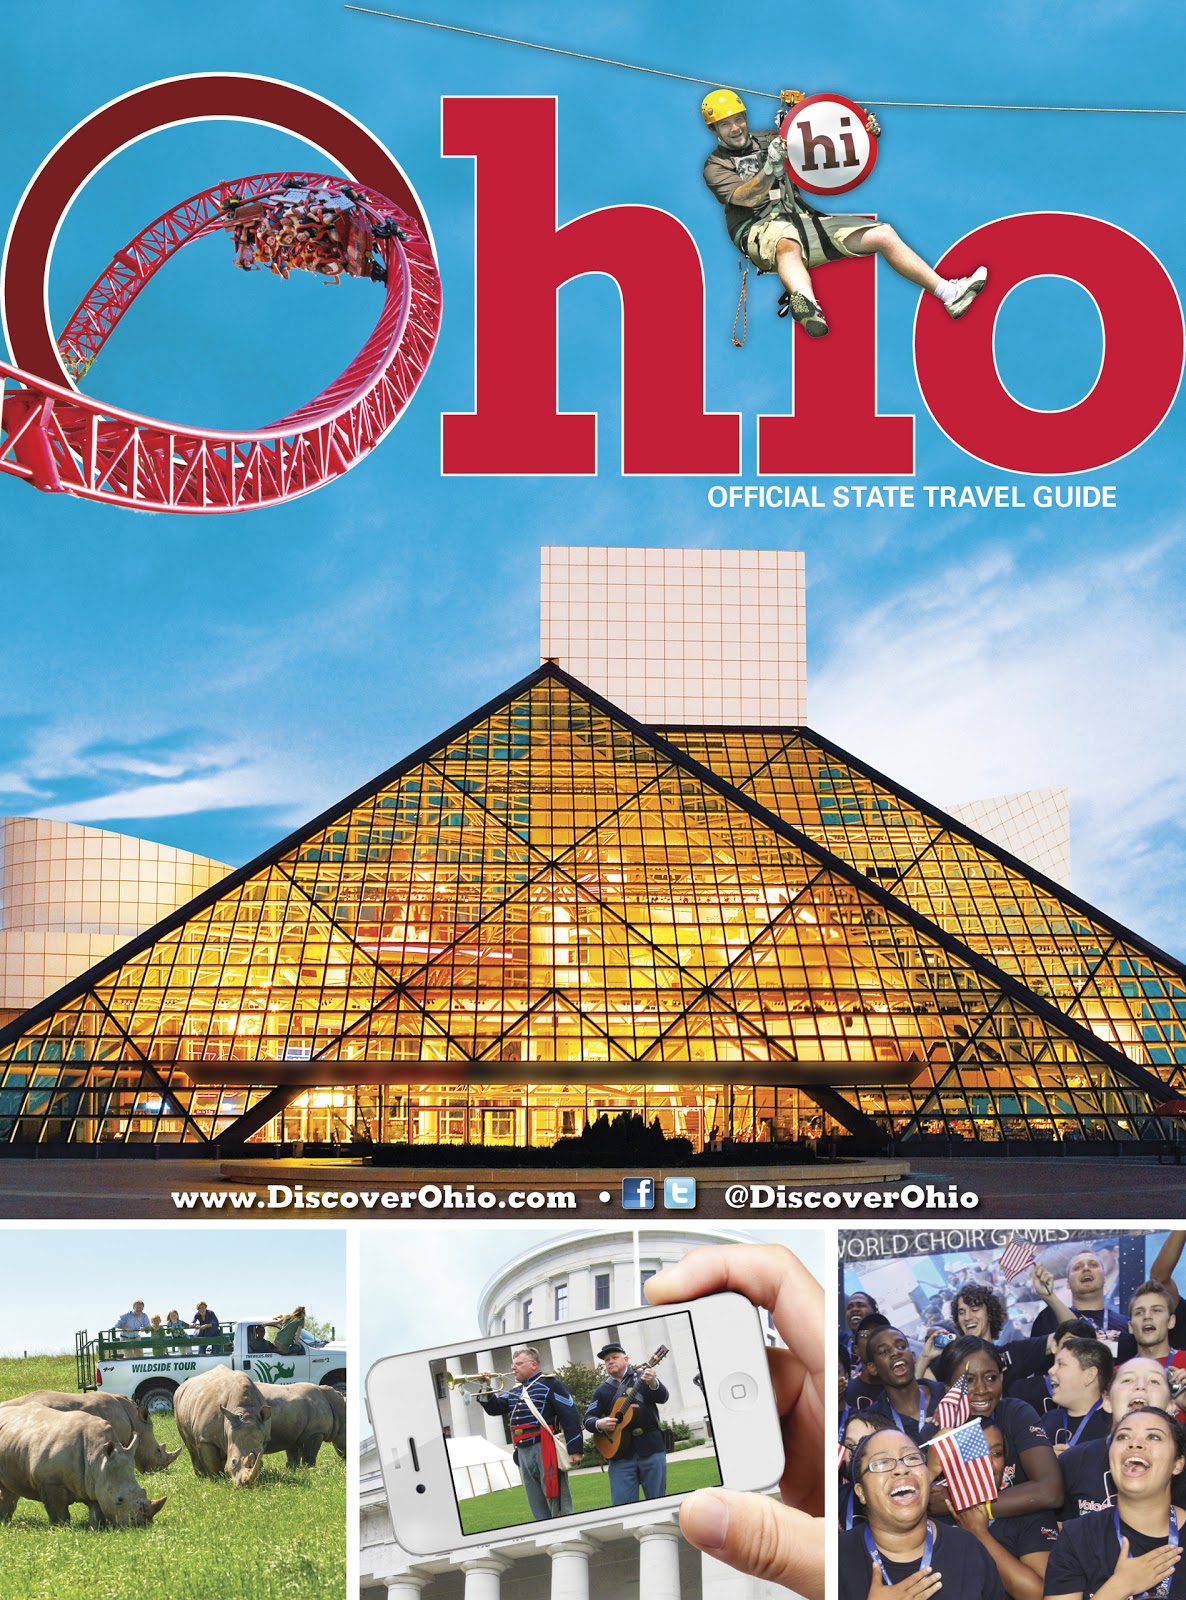 Ohio Tourism Month Brings Deals, Contests for Travelers Gr8LakesCamper